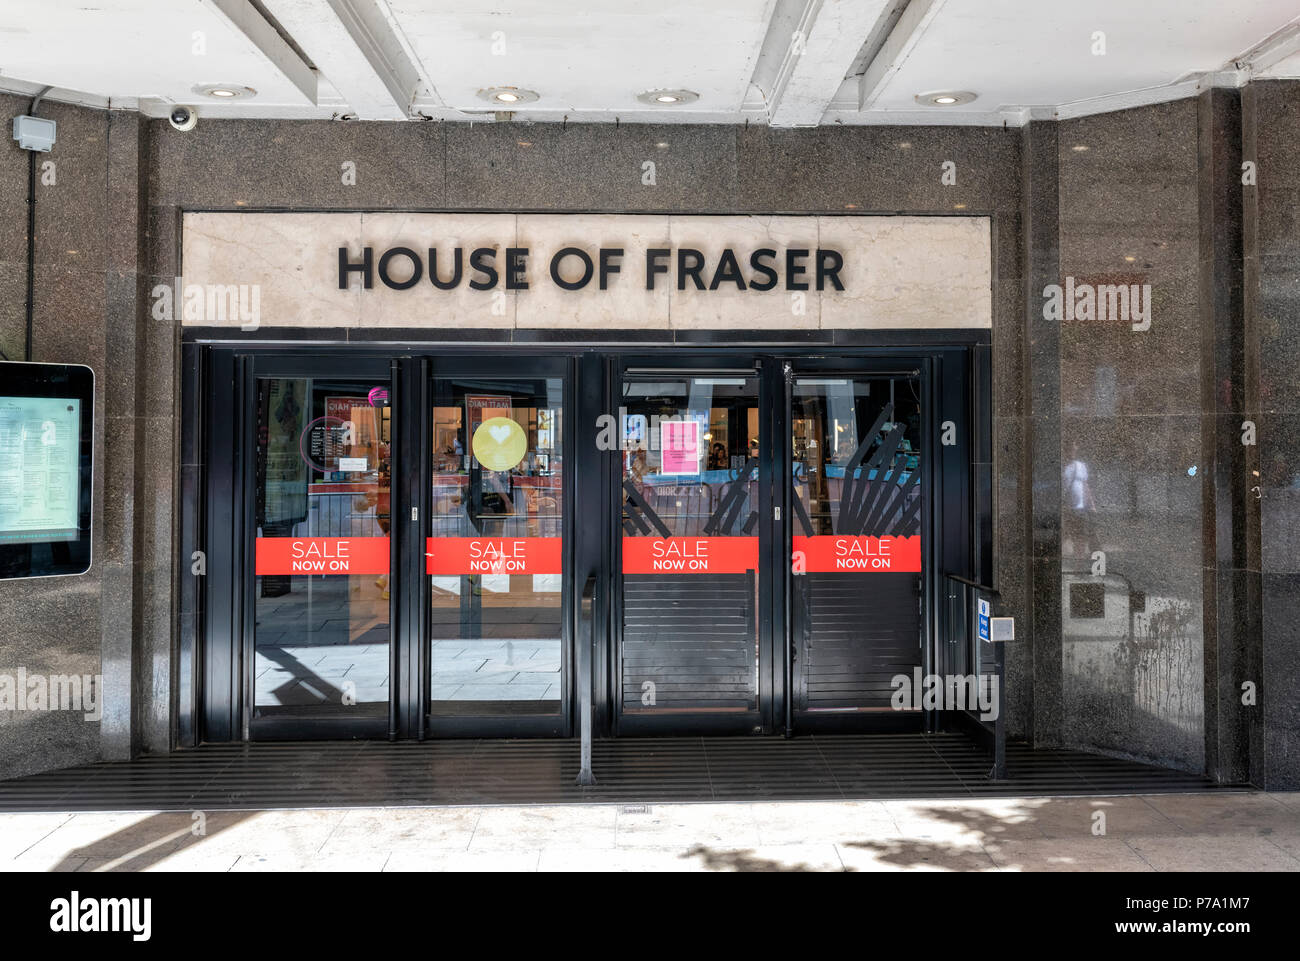 Sale signs on the doors of a House of Fraser Department Store in Manchester, UK Stock Photo